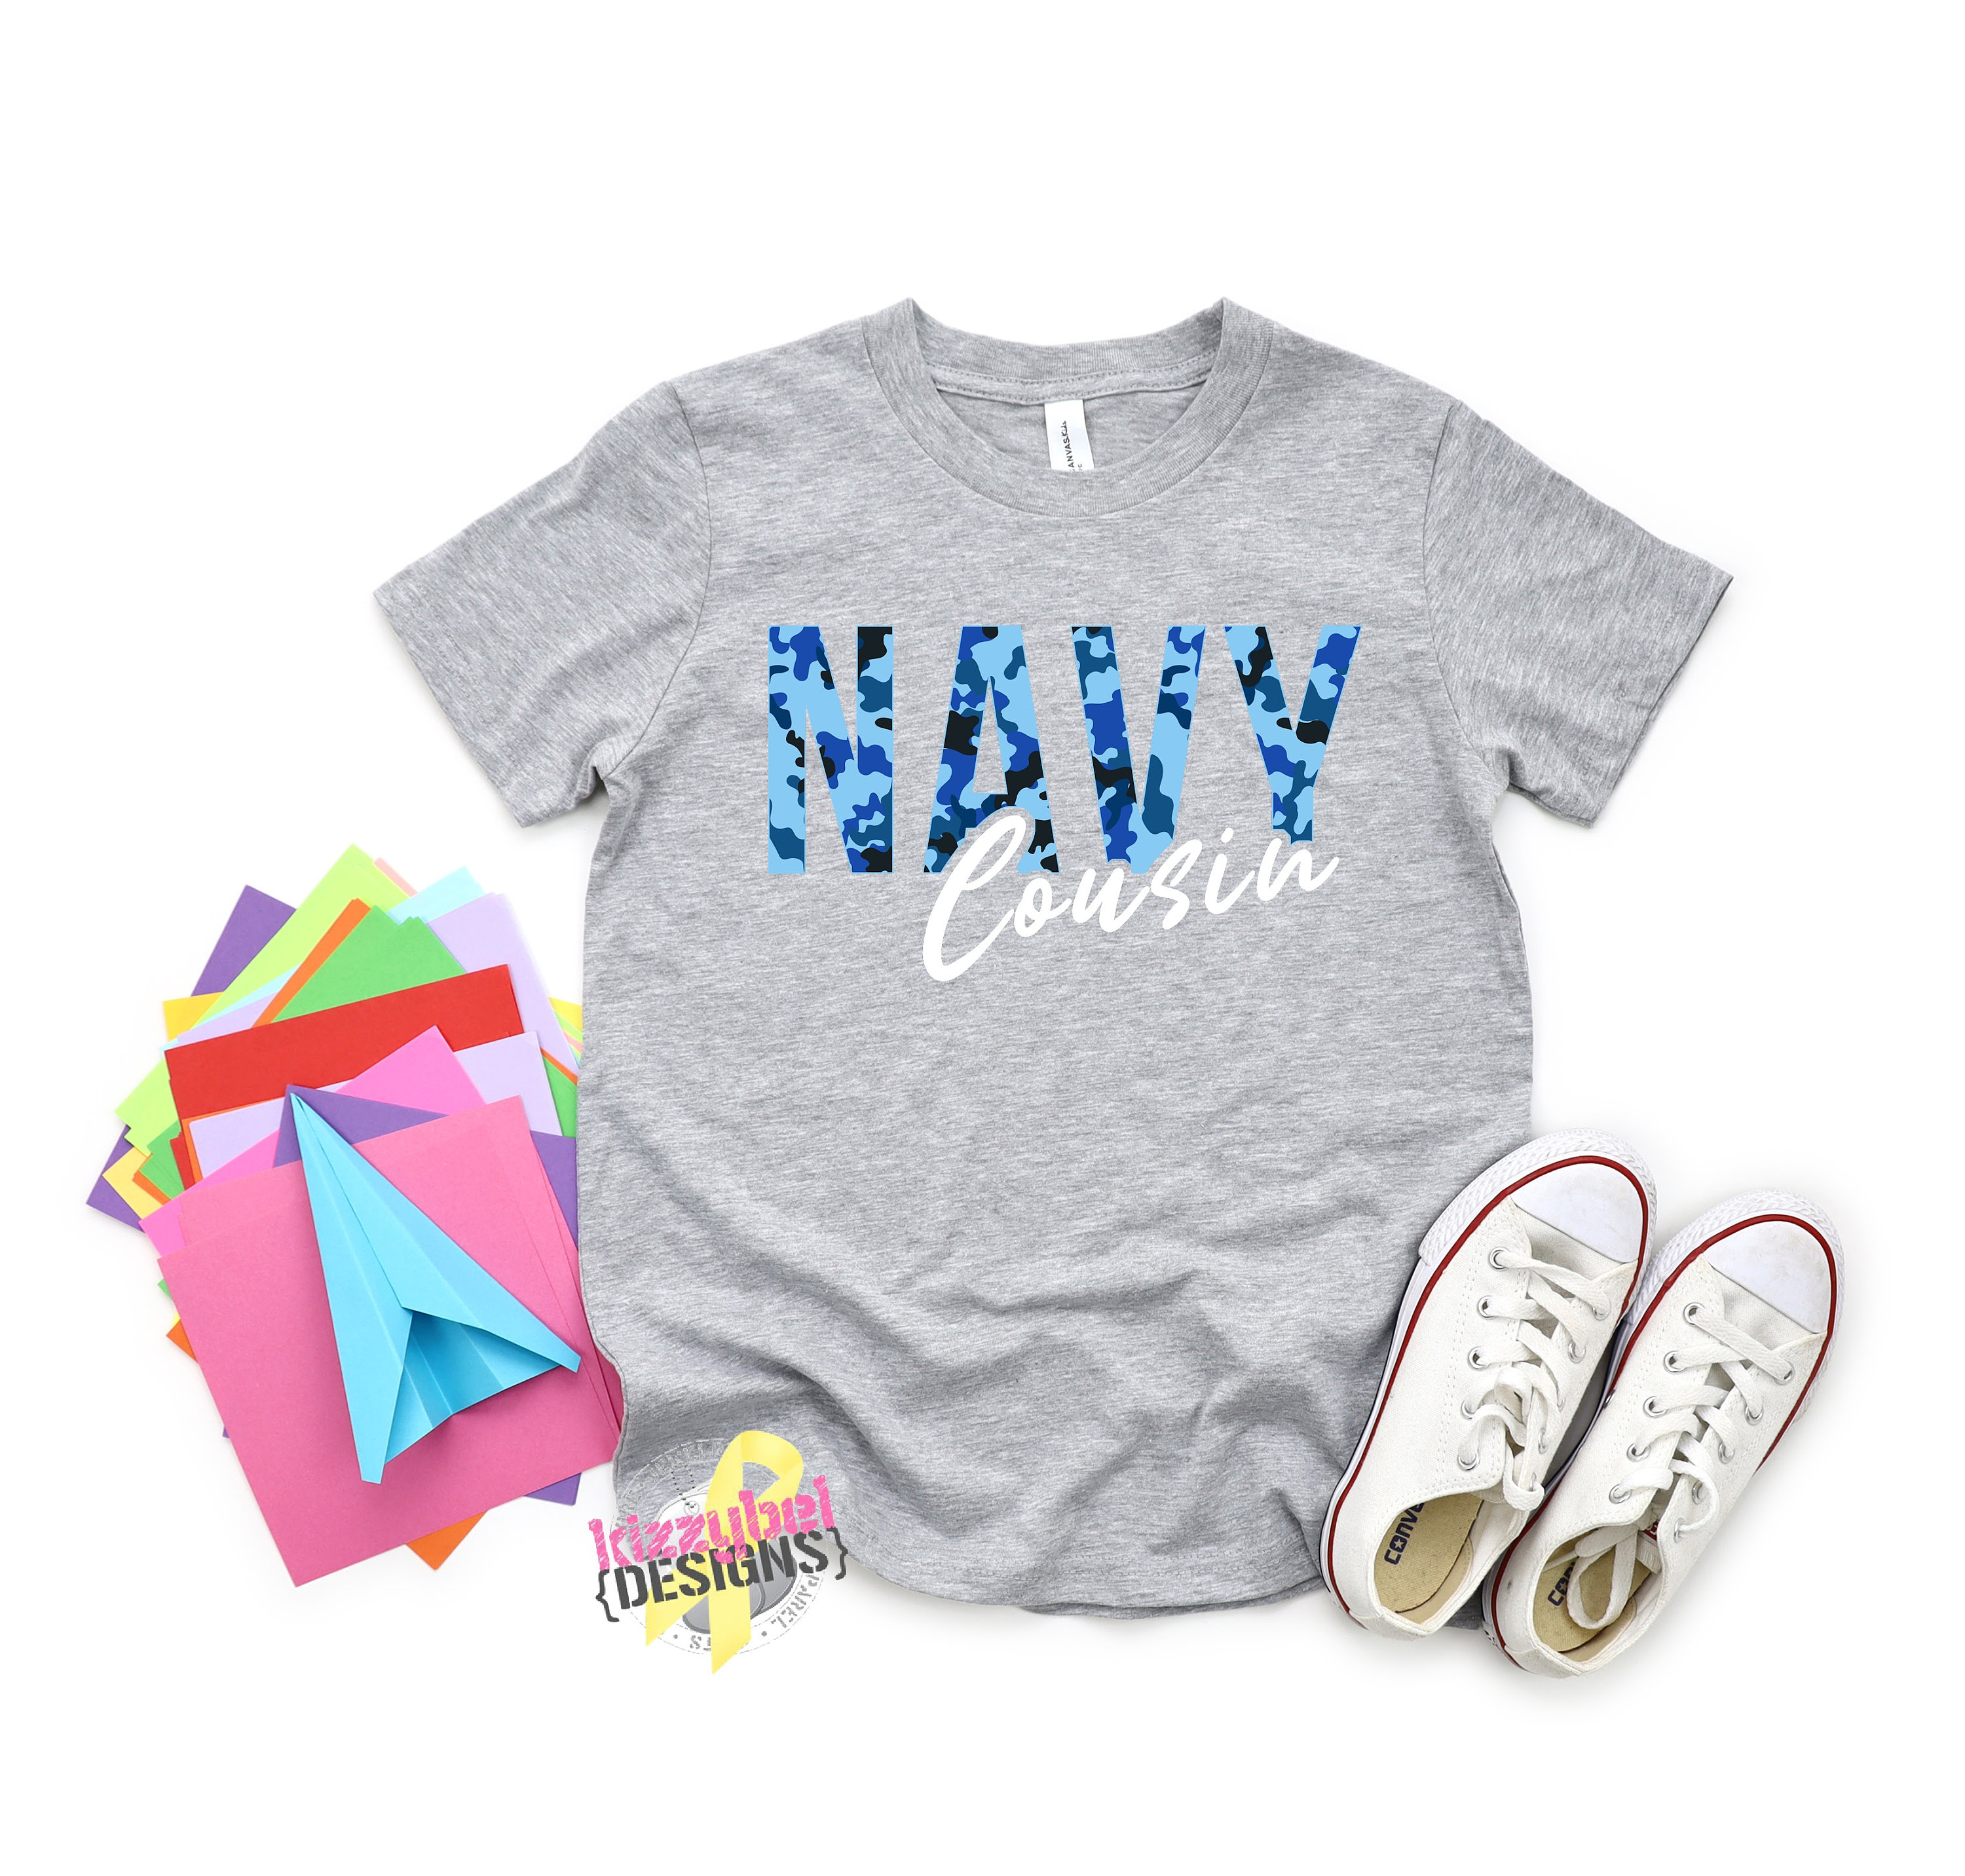 Christmas Gift For Navy Cousin Navy Cousins Kids Tees Graduation Birthday Homecoming Outfit Deployment Navy Cousin Toddler Flag Shirt